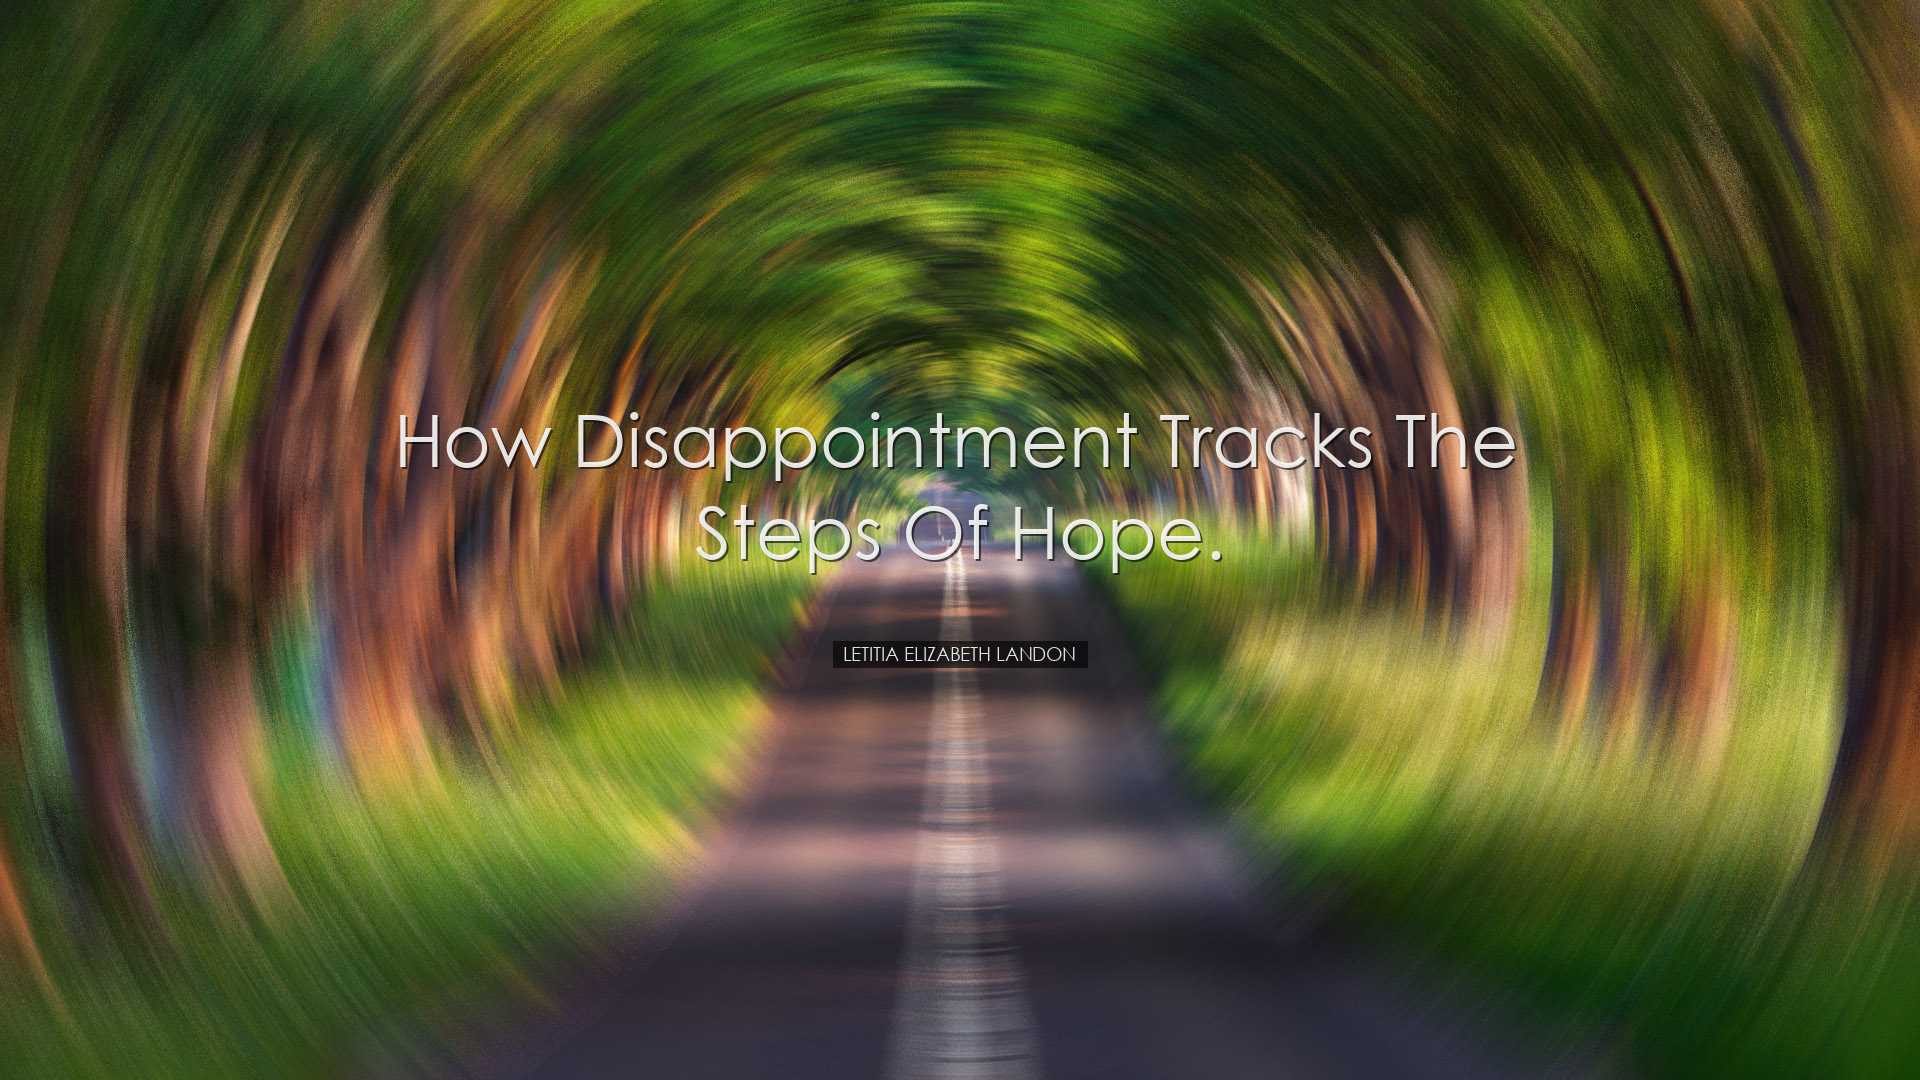 How disappointment tracks the steps of hope. - Letitia Elizabeth L